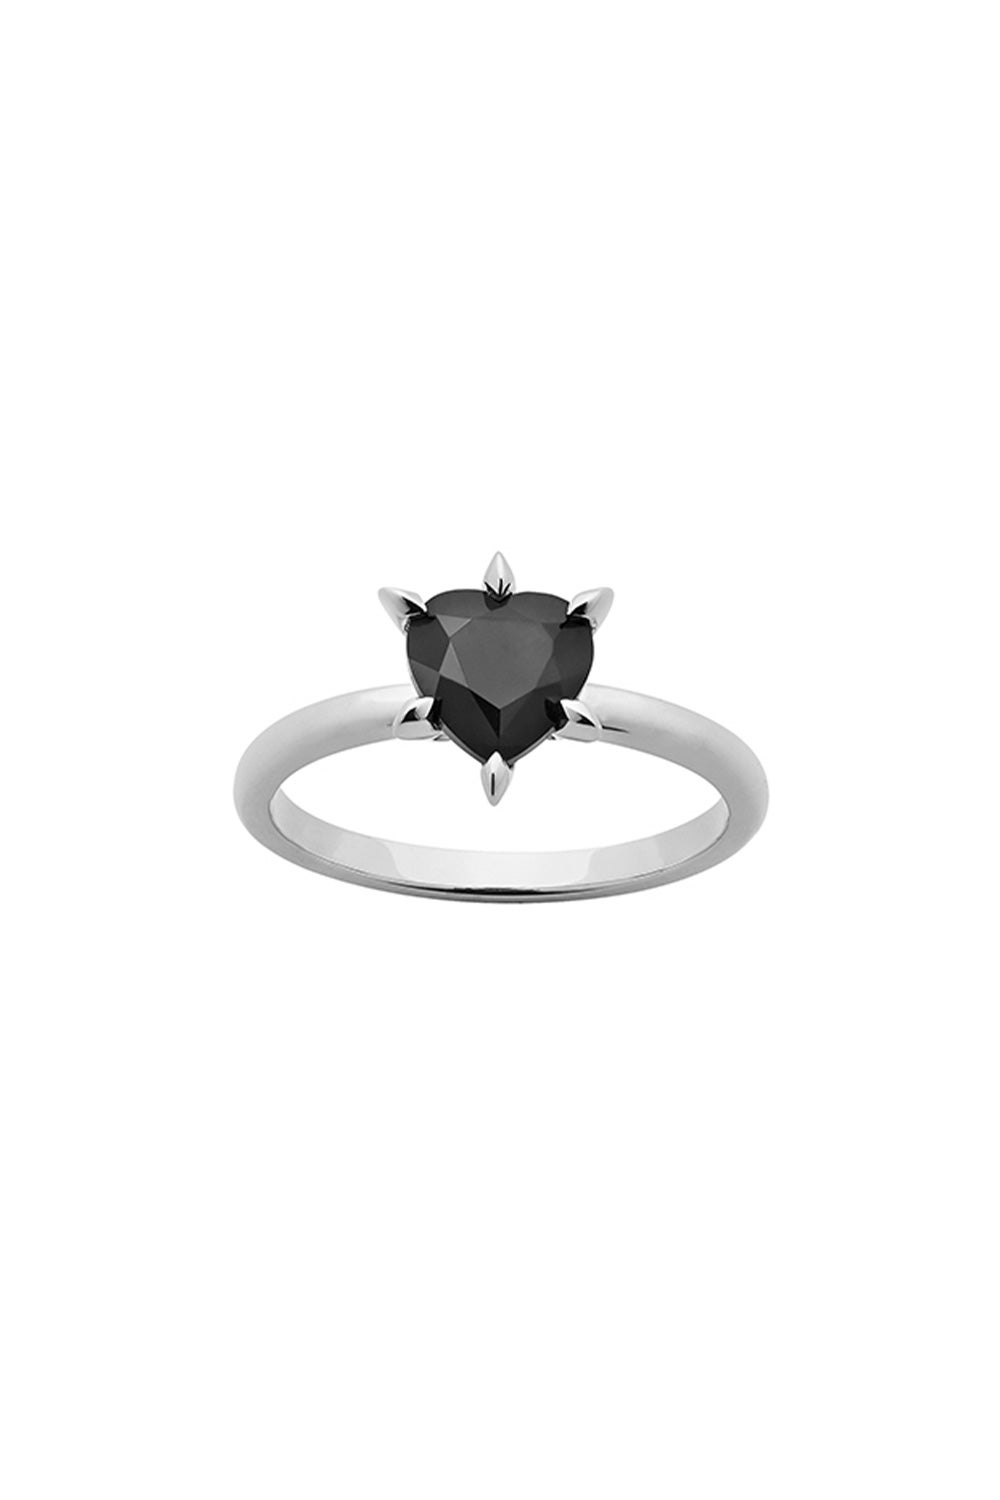 Cupid's Heart Ring Silver Onyx